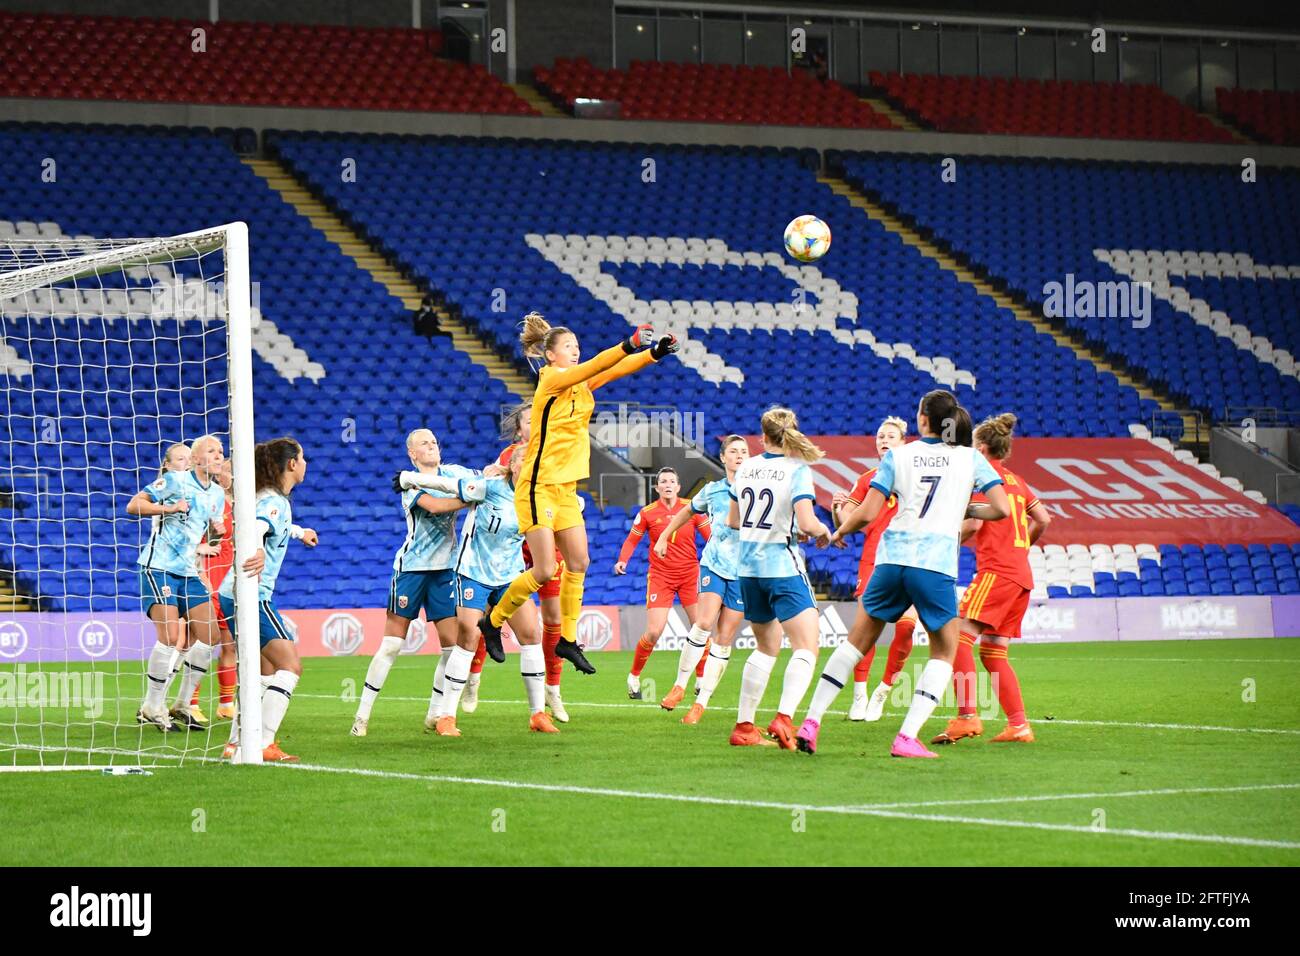 Cardiff, Wales. 27 October, 2020. Goalkeeper Cecilie Fiskerstrand of Norway Women punches the ball clear during the UEFA Women's European Championship 2020 Qualifying Group C match between Wales Women and Norway Women at the Cardiff City Stadium in Cardiff, Wales, UK on 27, October 2020. Credit: Duncan Thomas/Majestic Media. Stock Photo